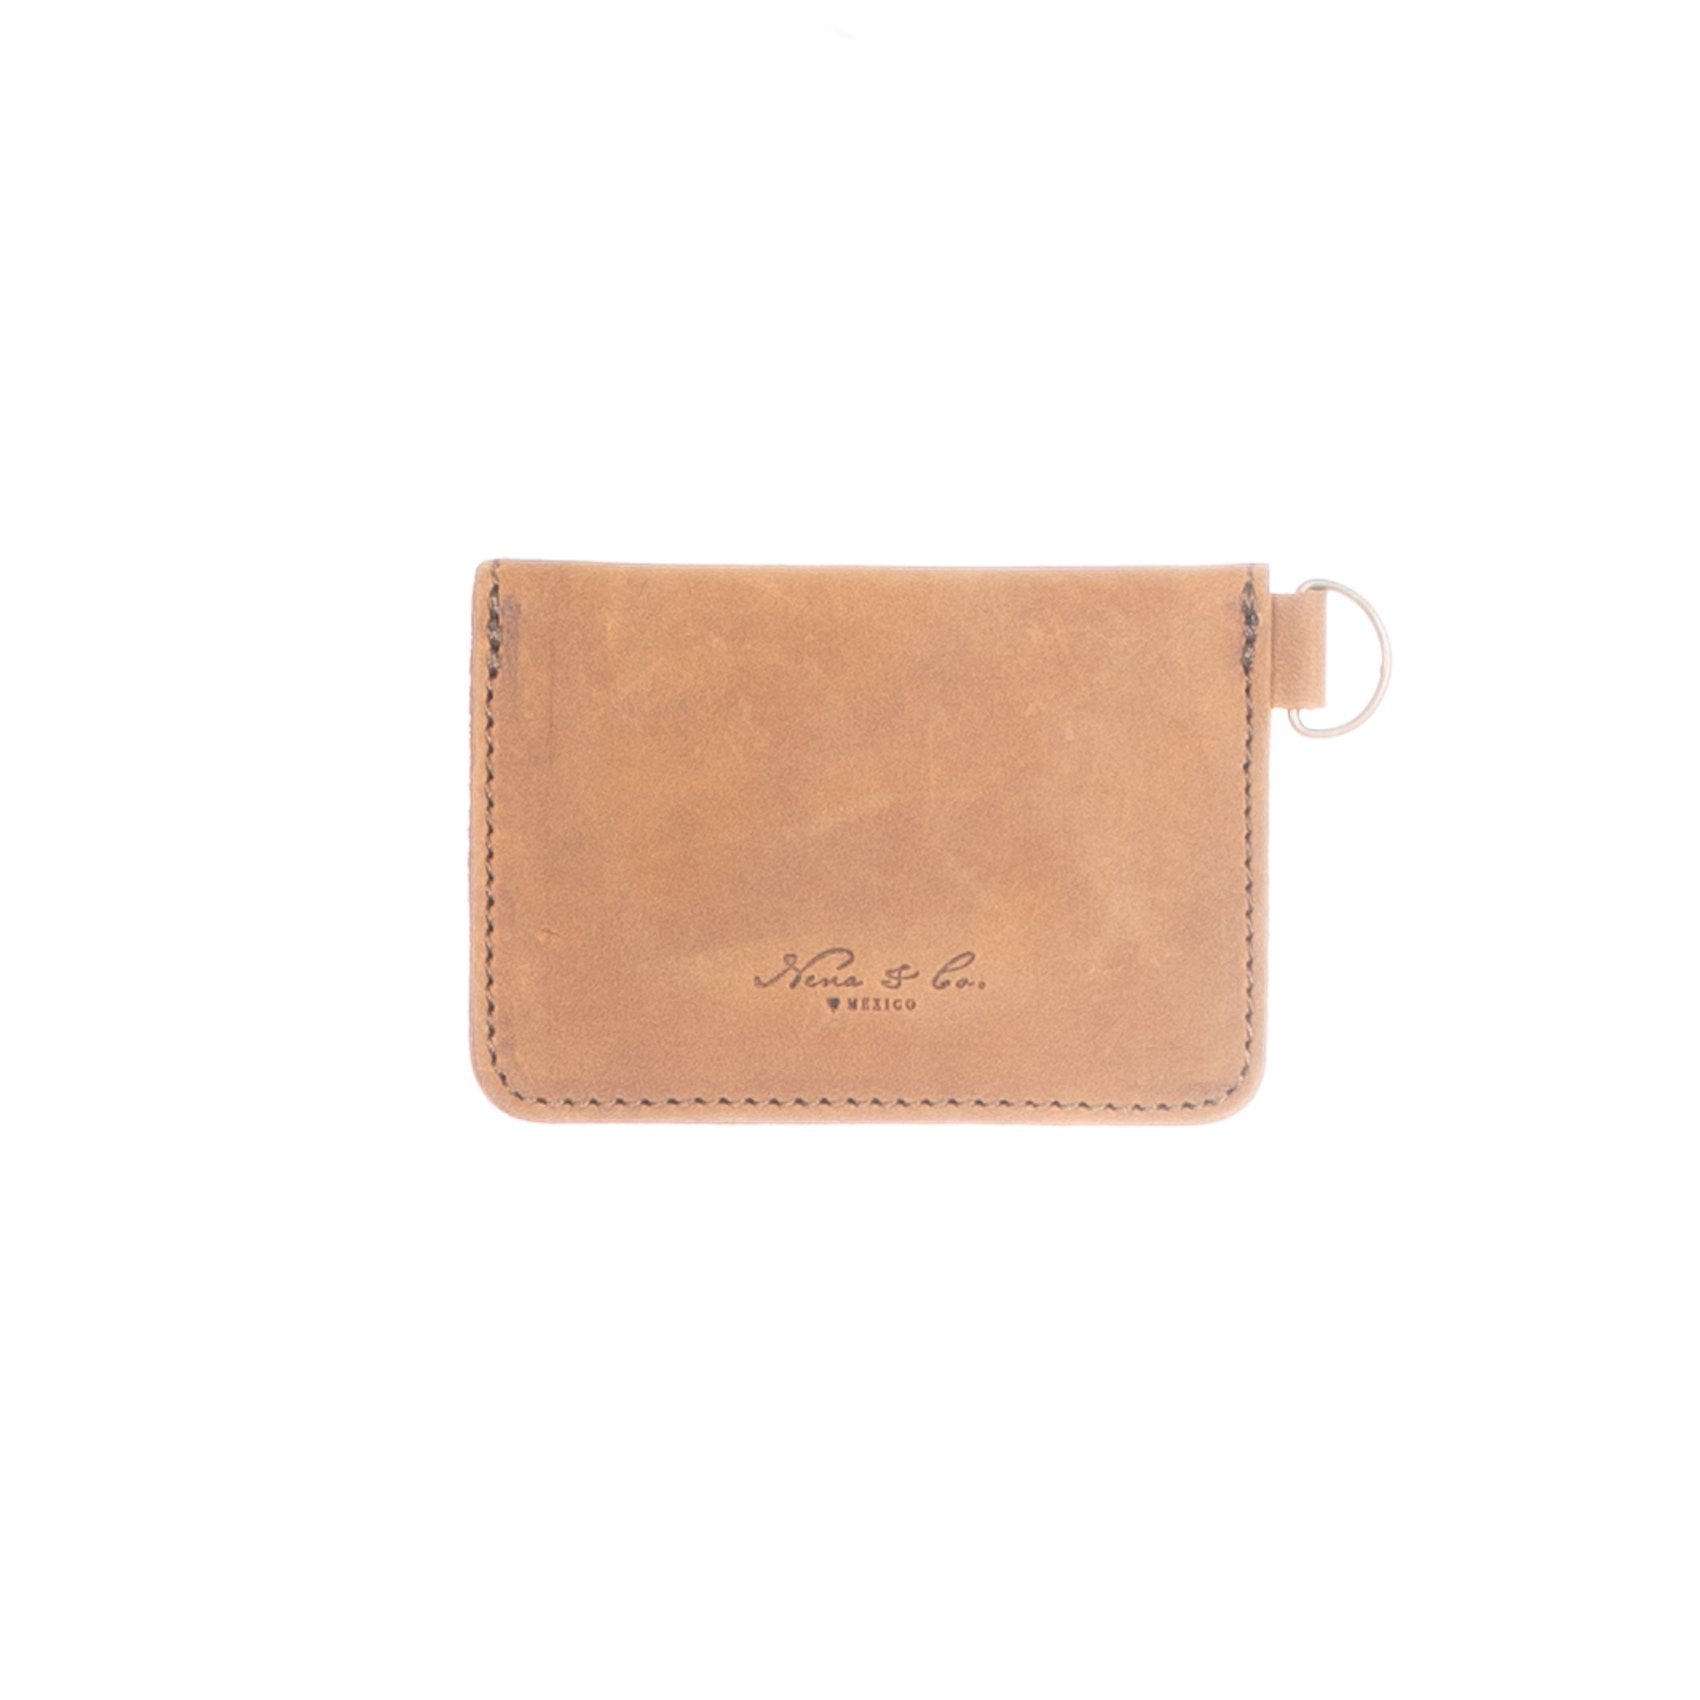 CARD WALLET - MEXICO COLLECTION - TOBACCO LEATHER